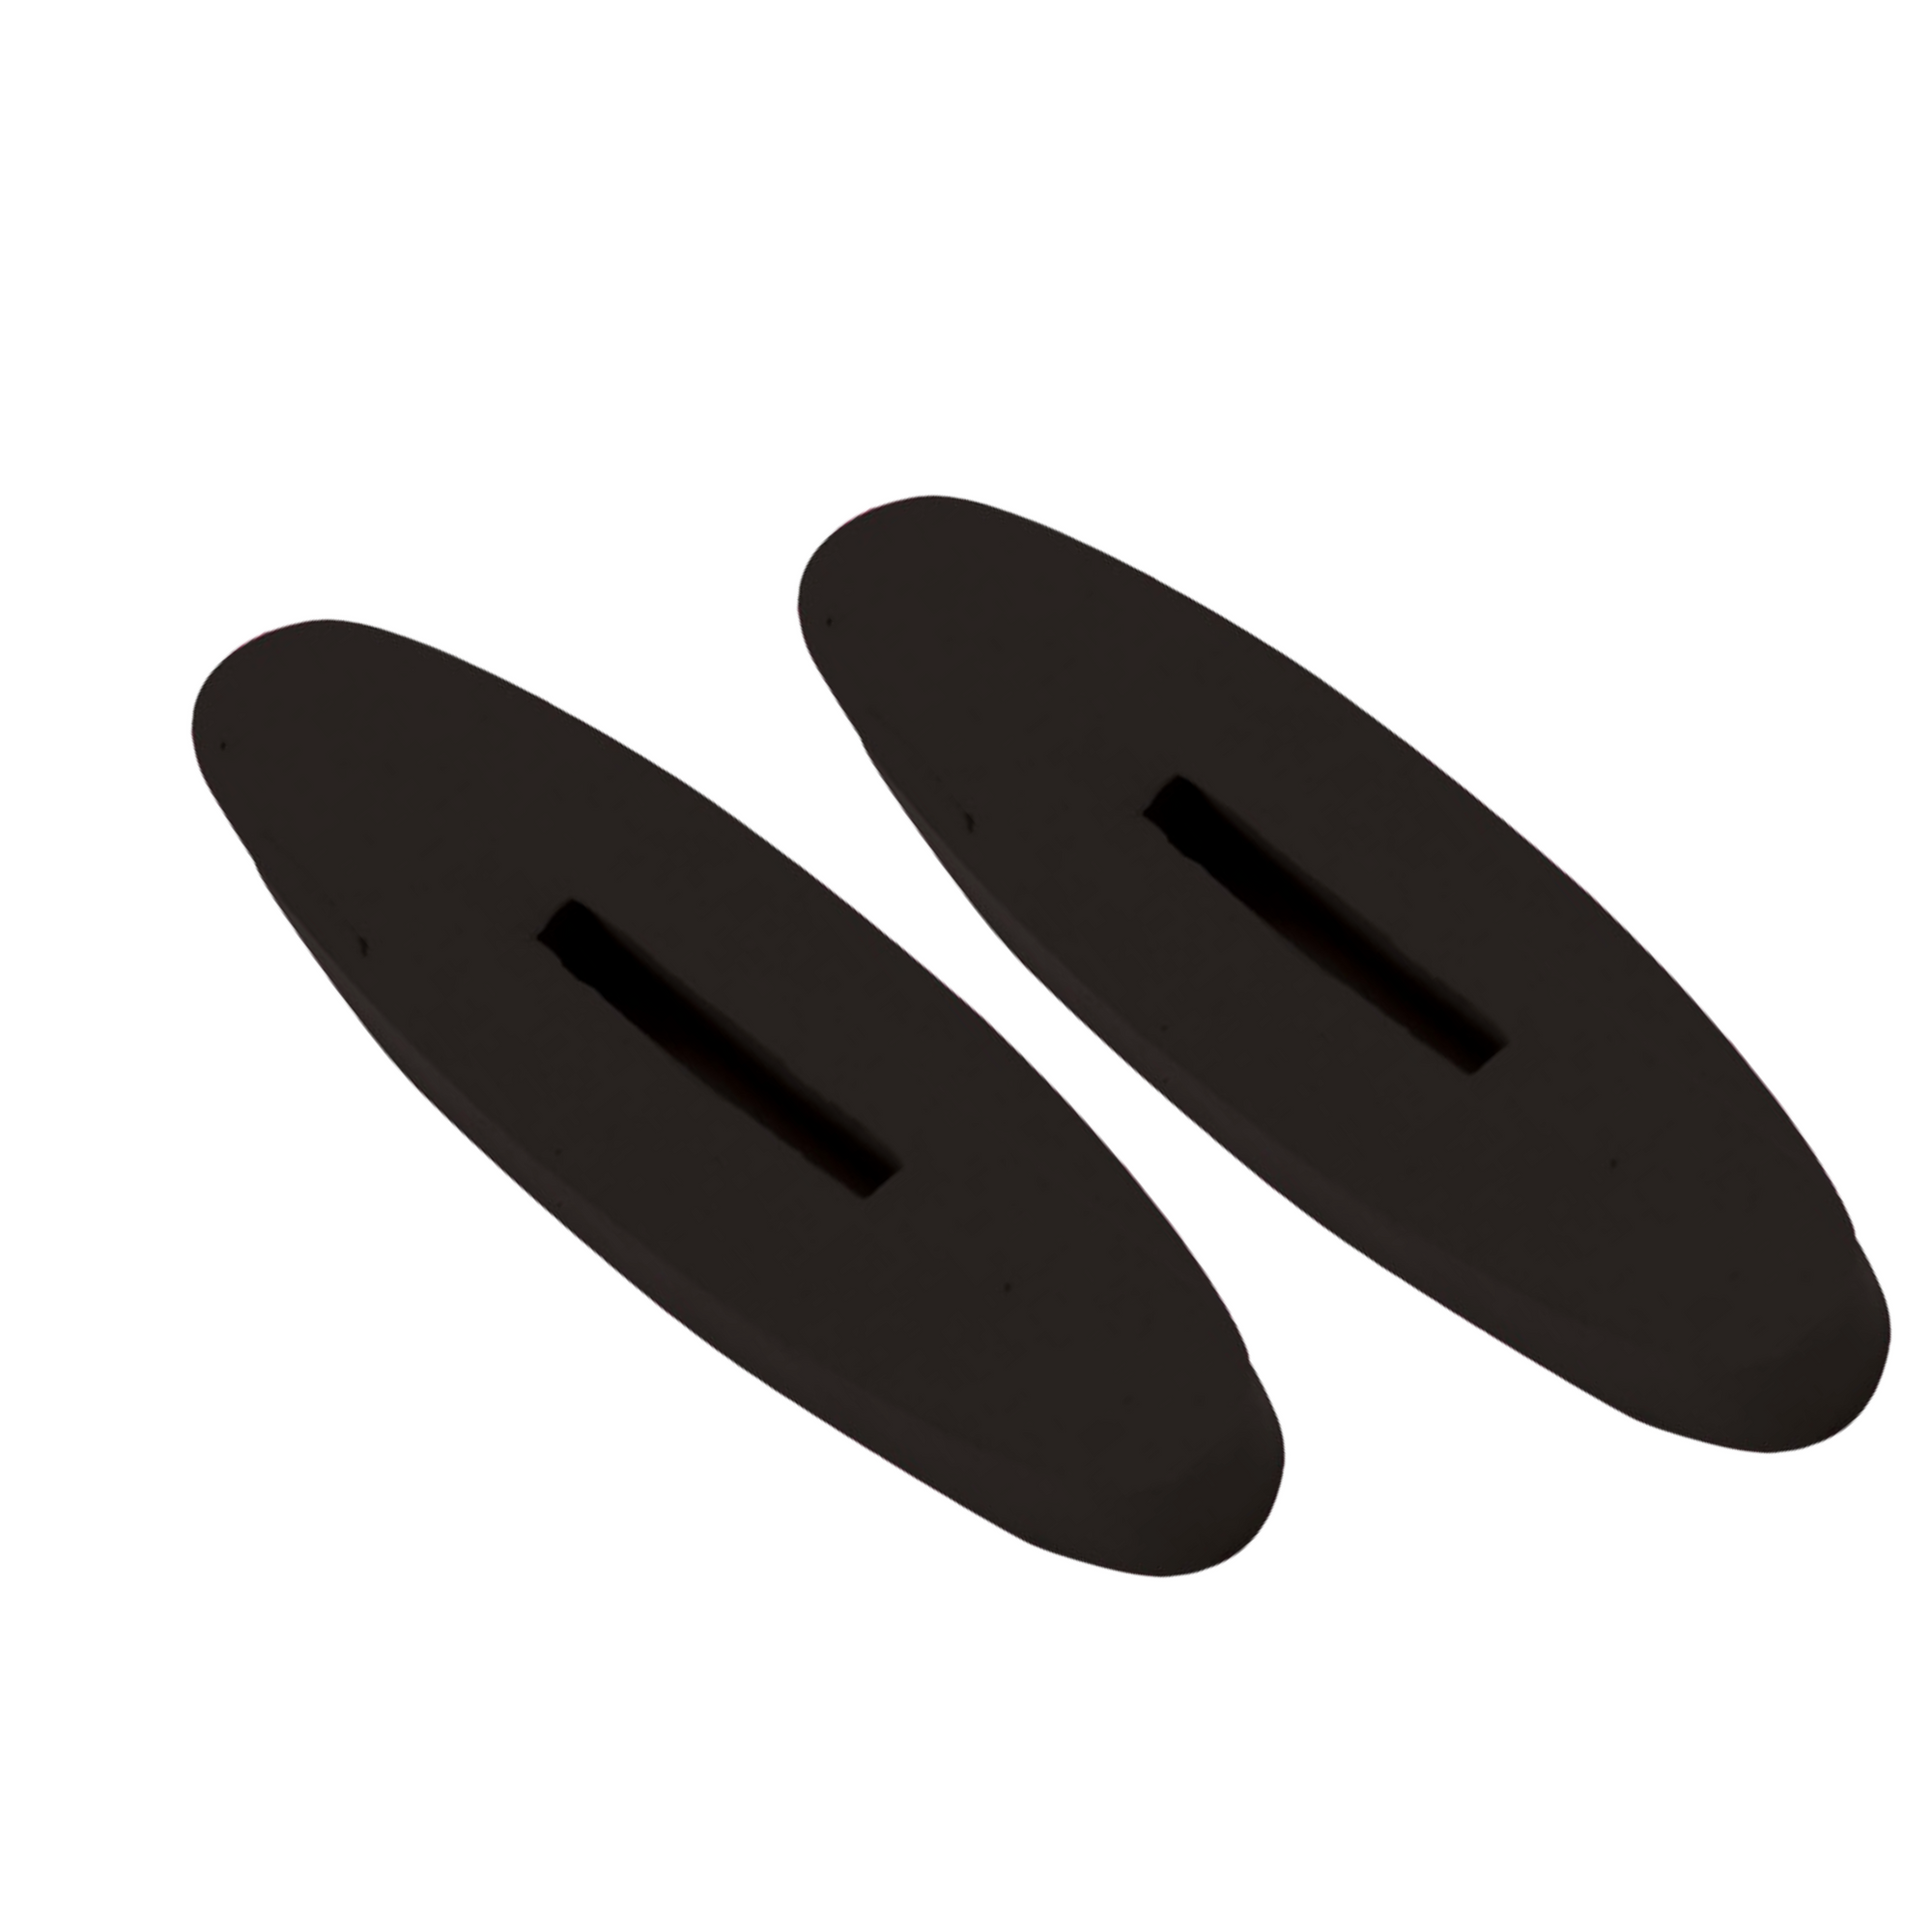 EcoPure Rubber Rein Stoppers in Black